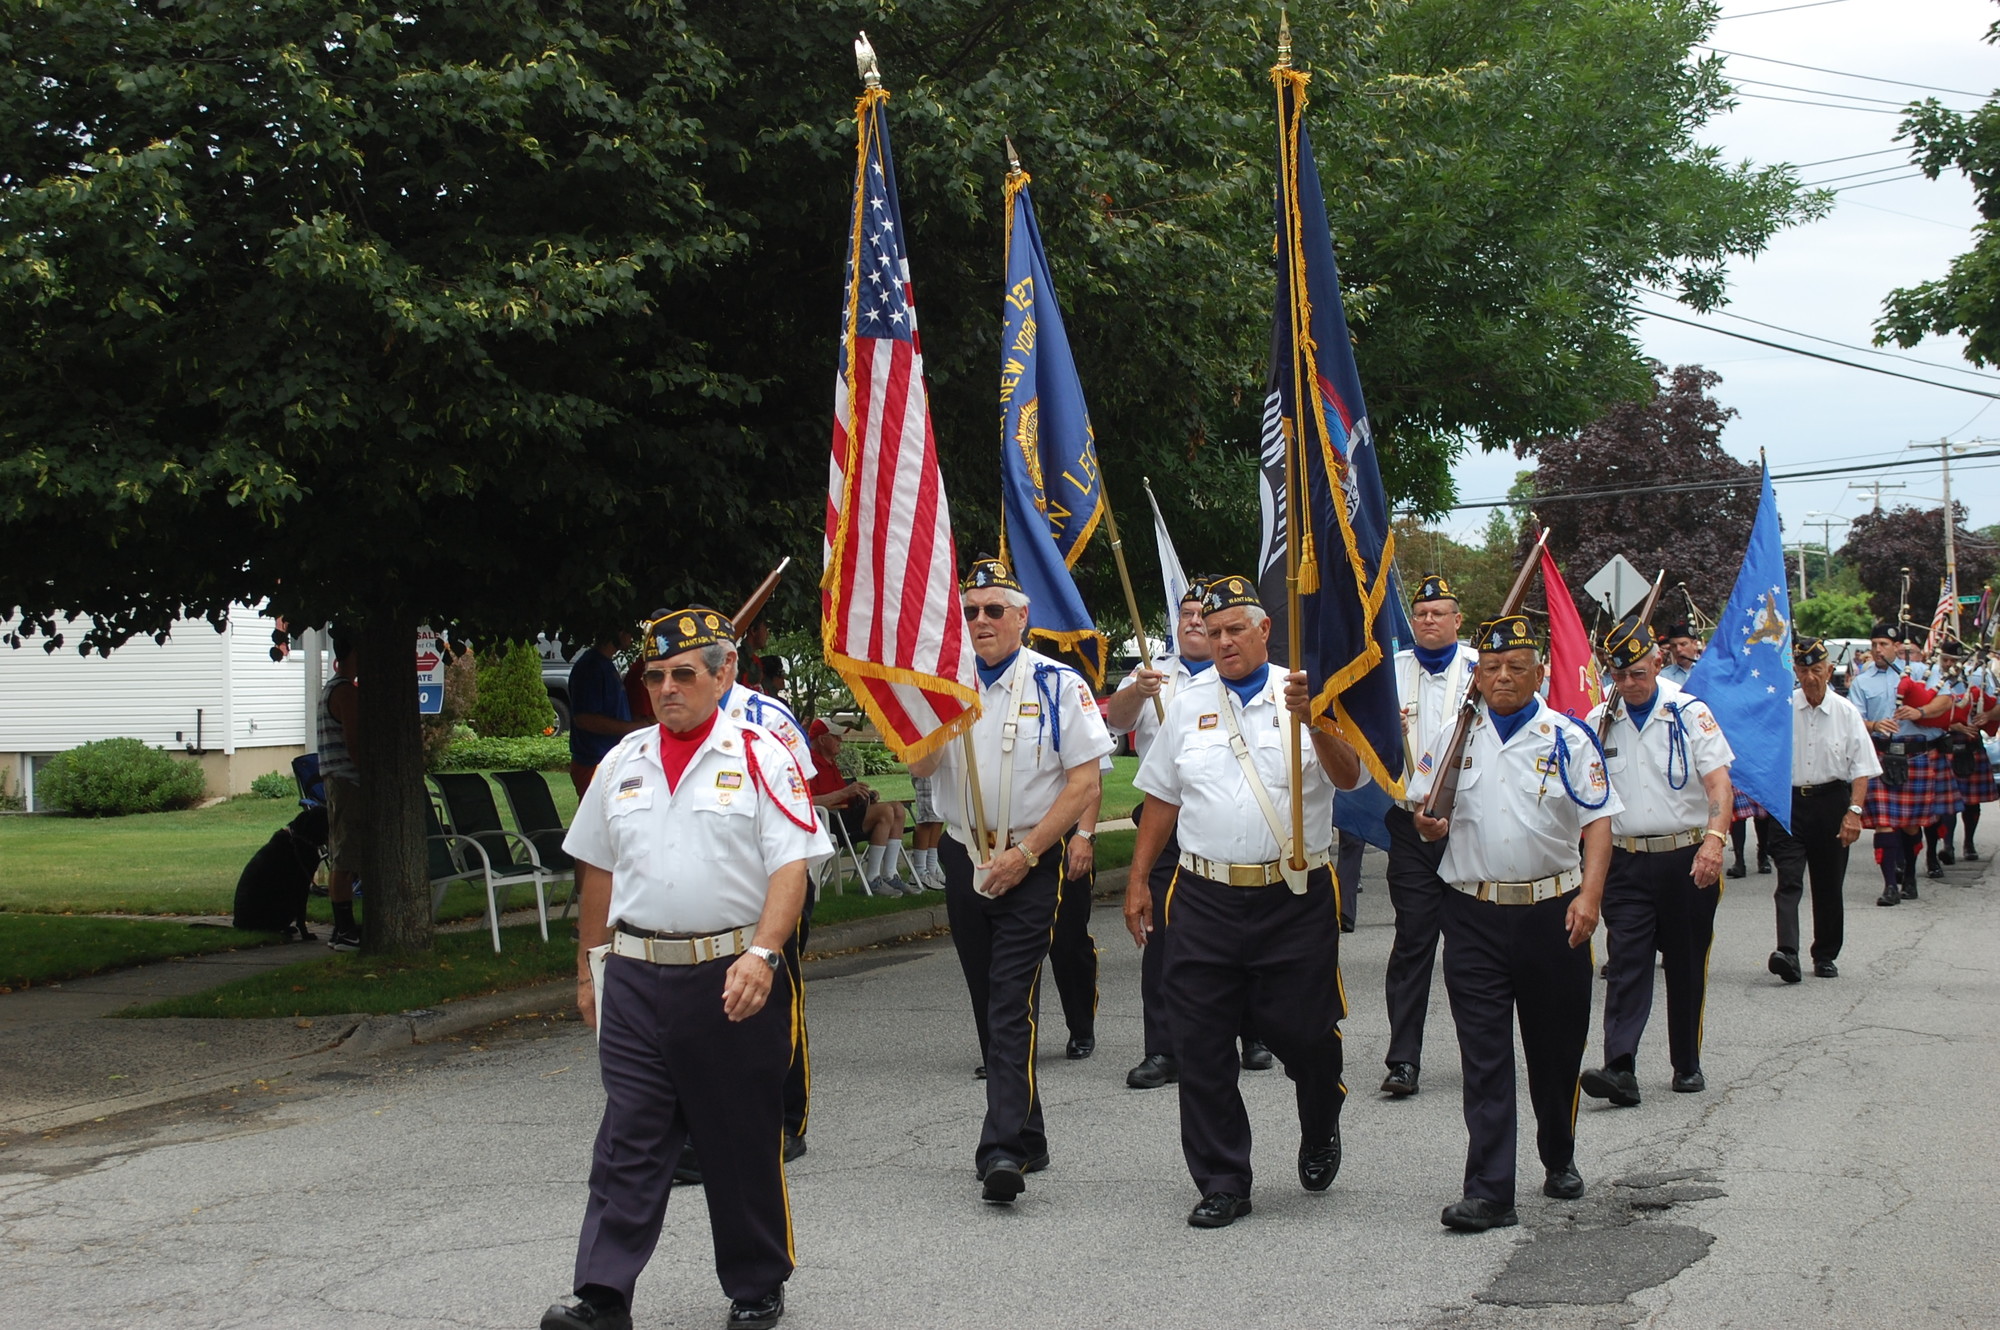 Veterans from American Legion Post 1273 were first up in Wantagh’s annual Fourth of July parade.